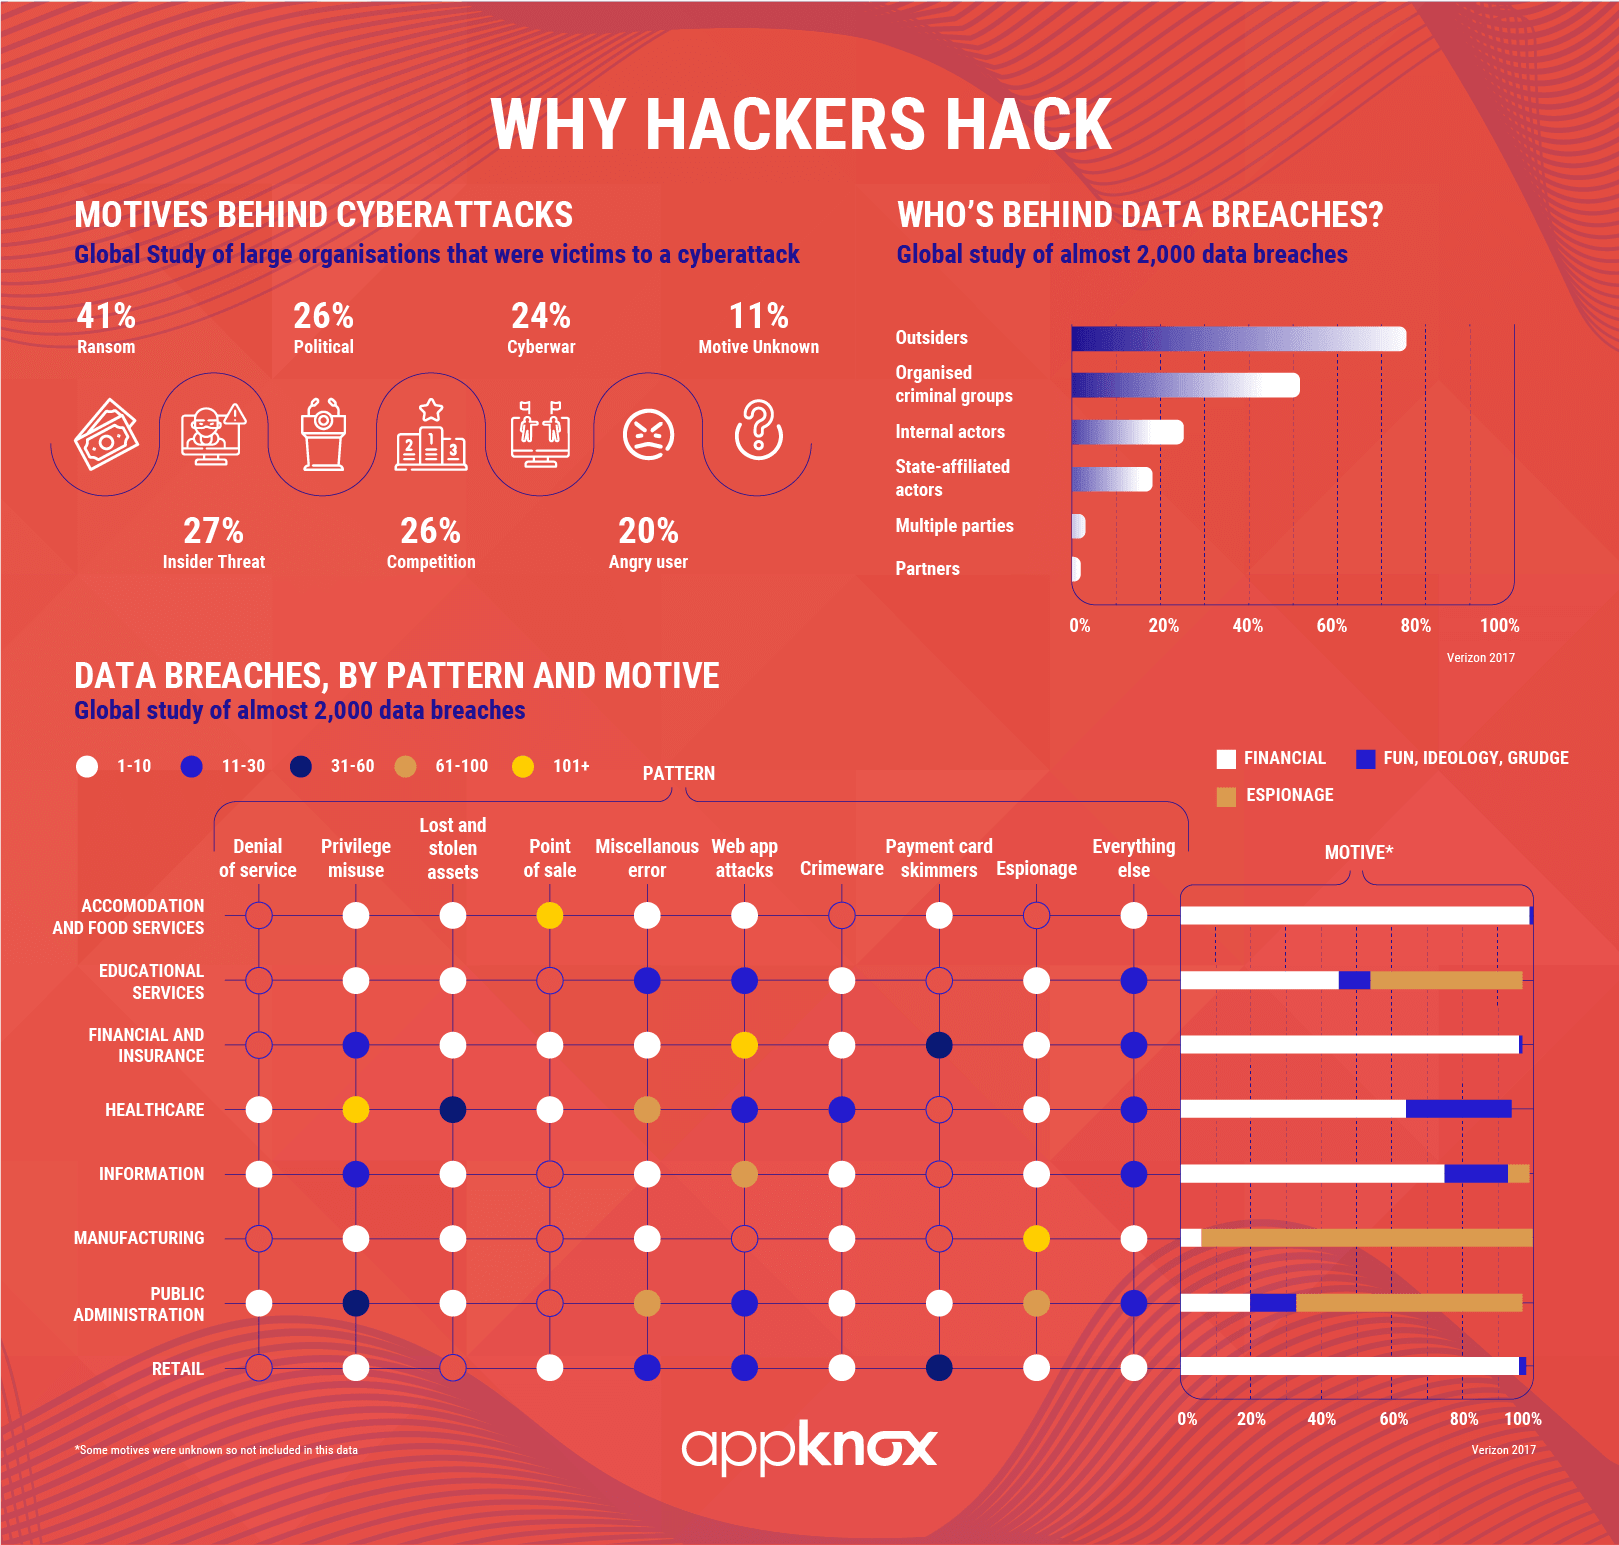 What has, in your opinion, been the biggest hacker attack to date